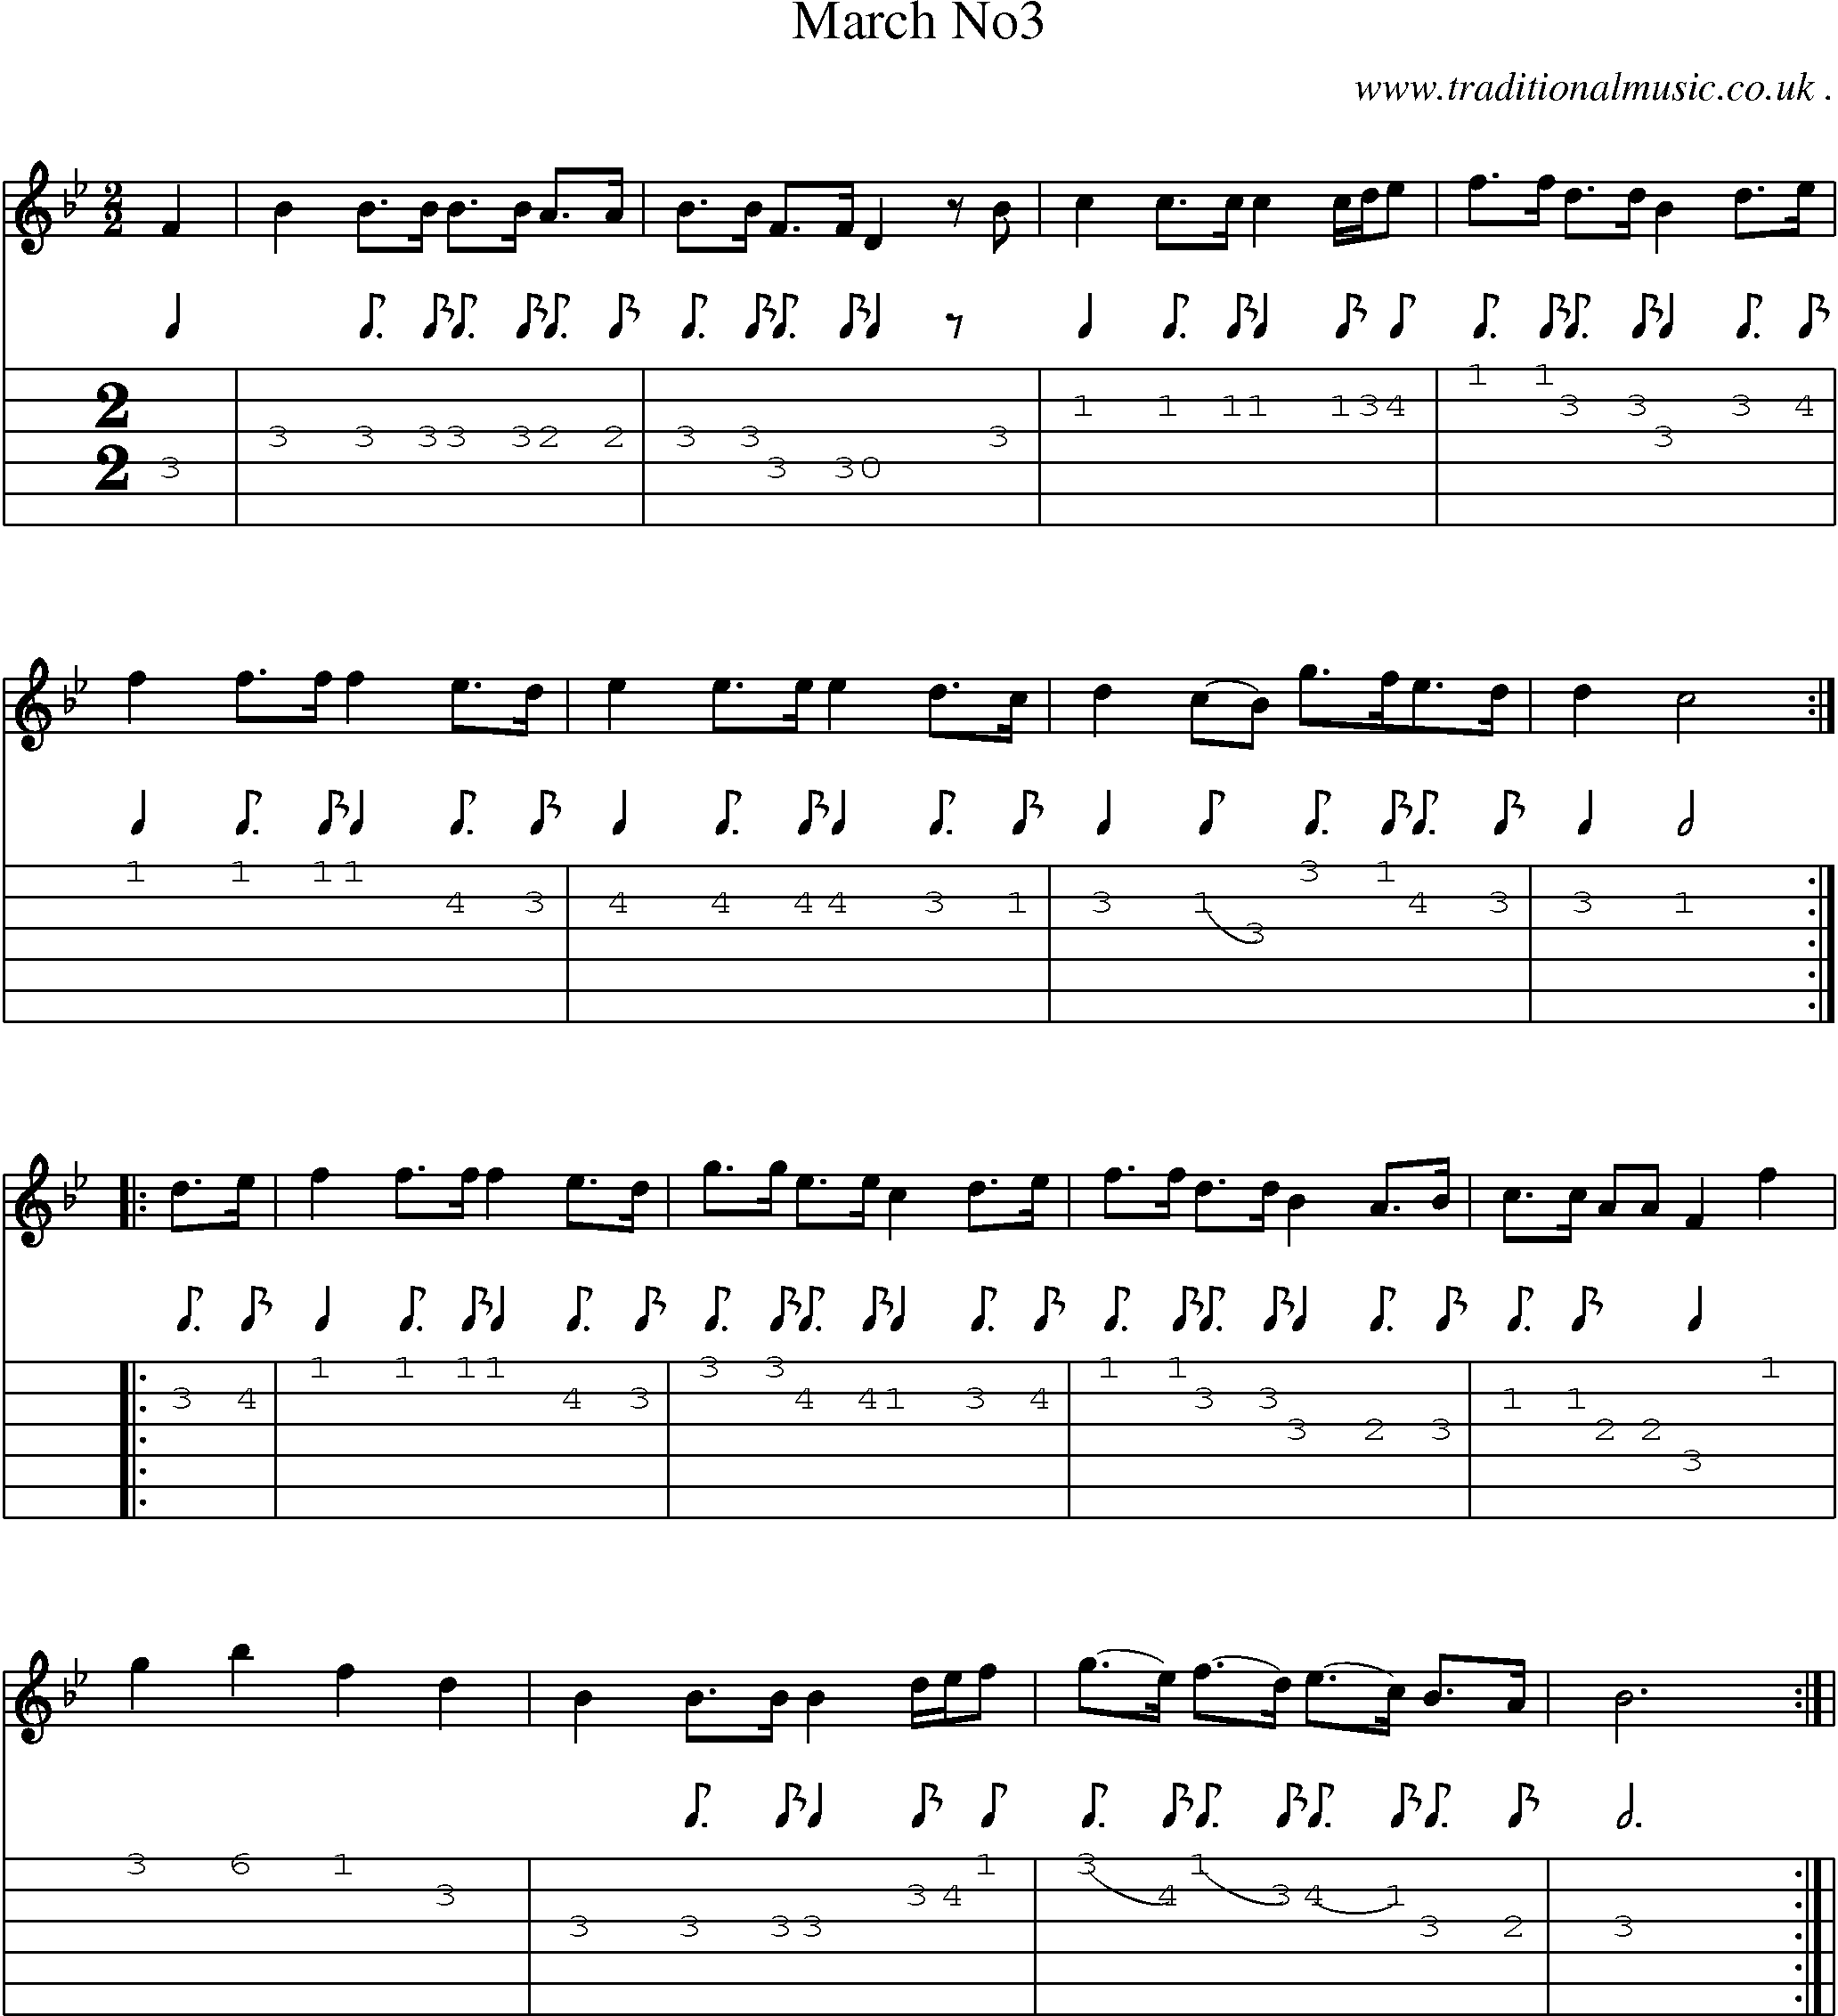 Sheet-Music and Guitar Tabs for March No3